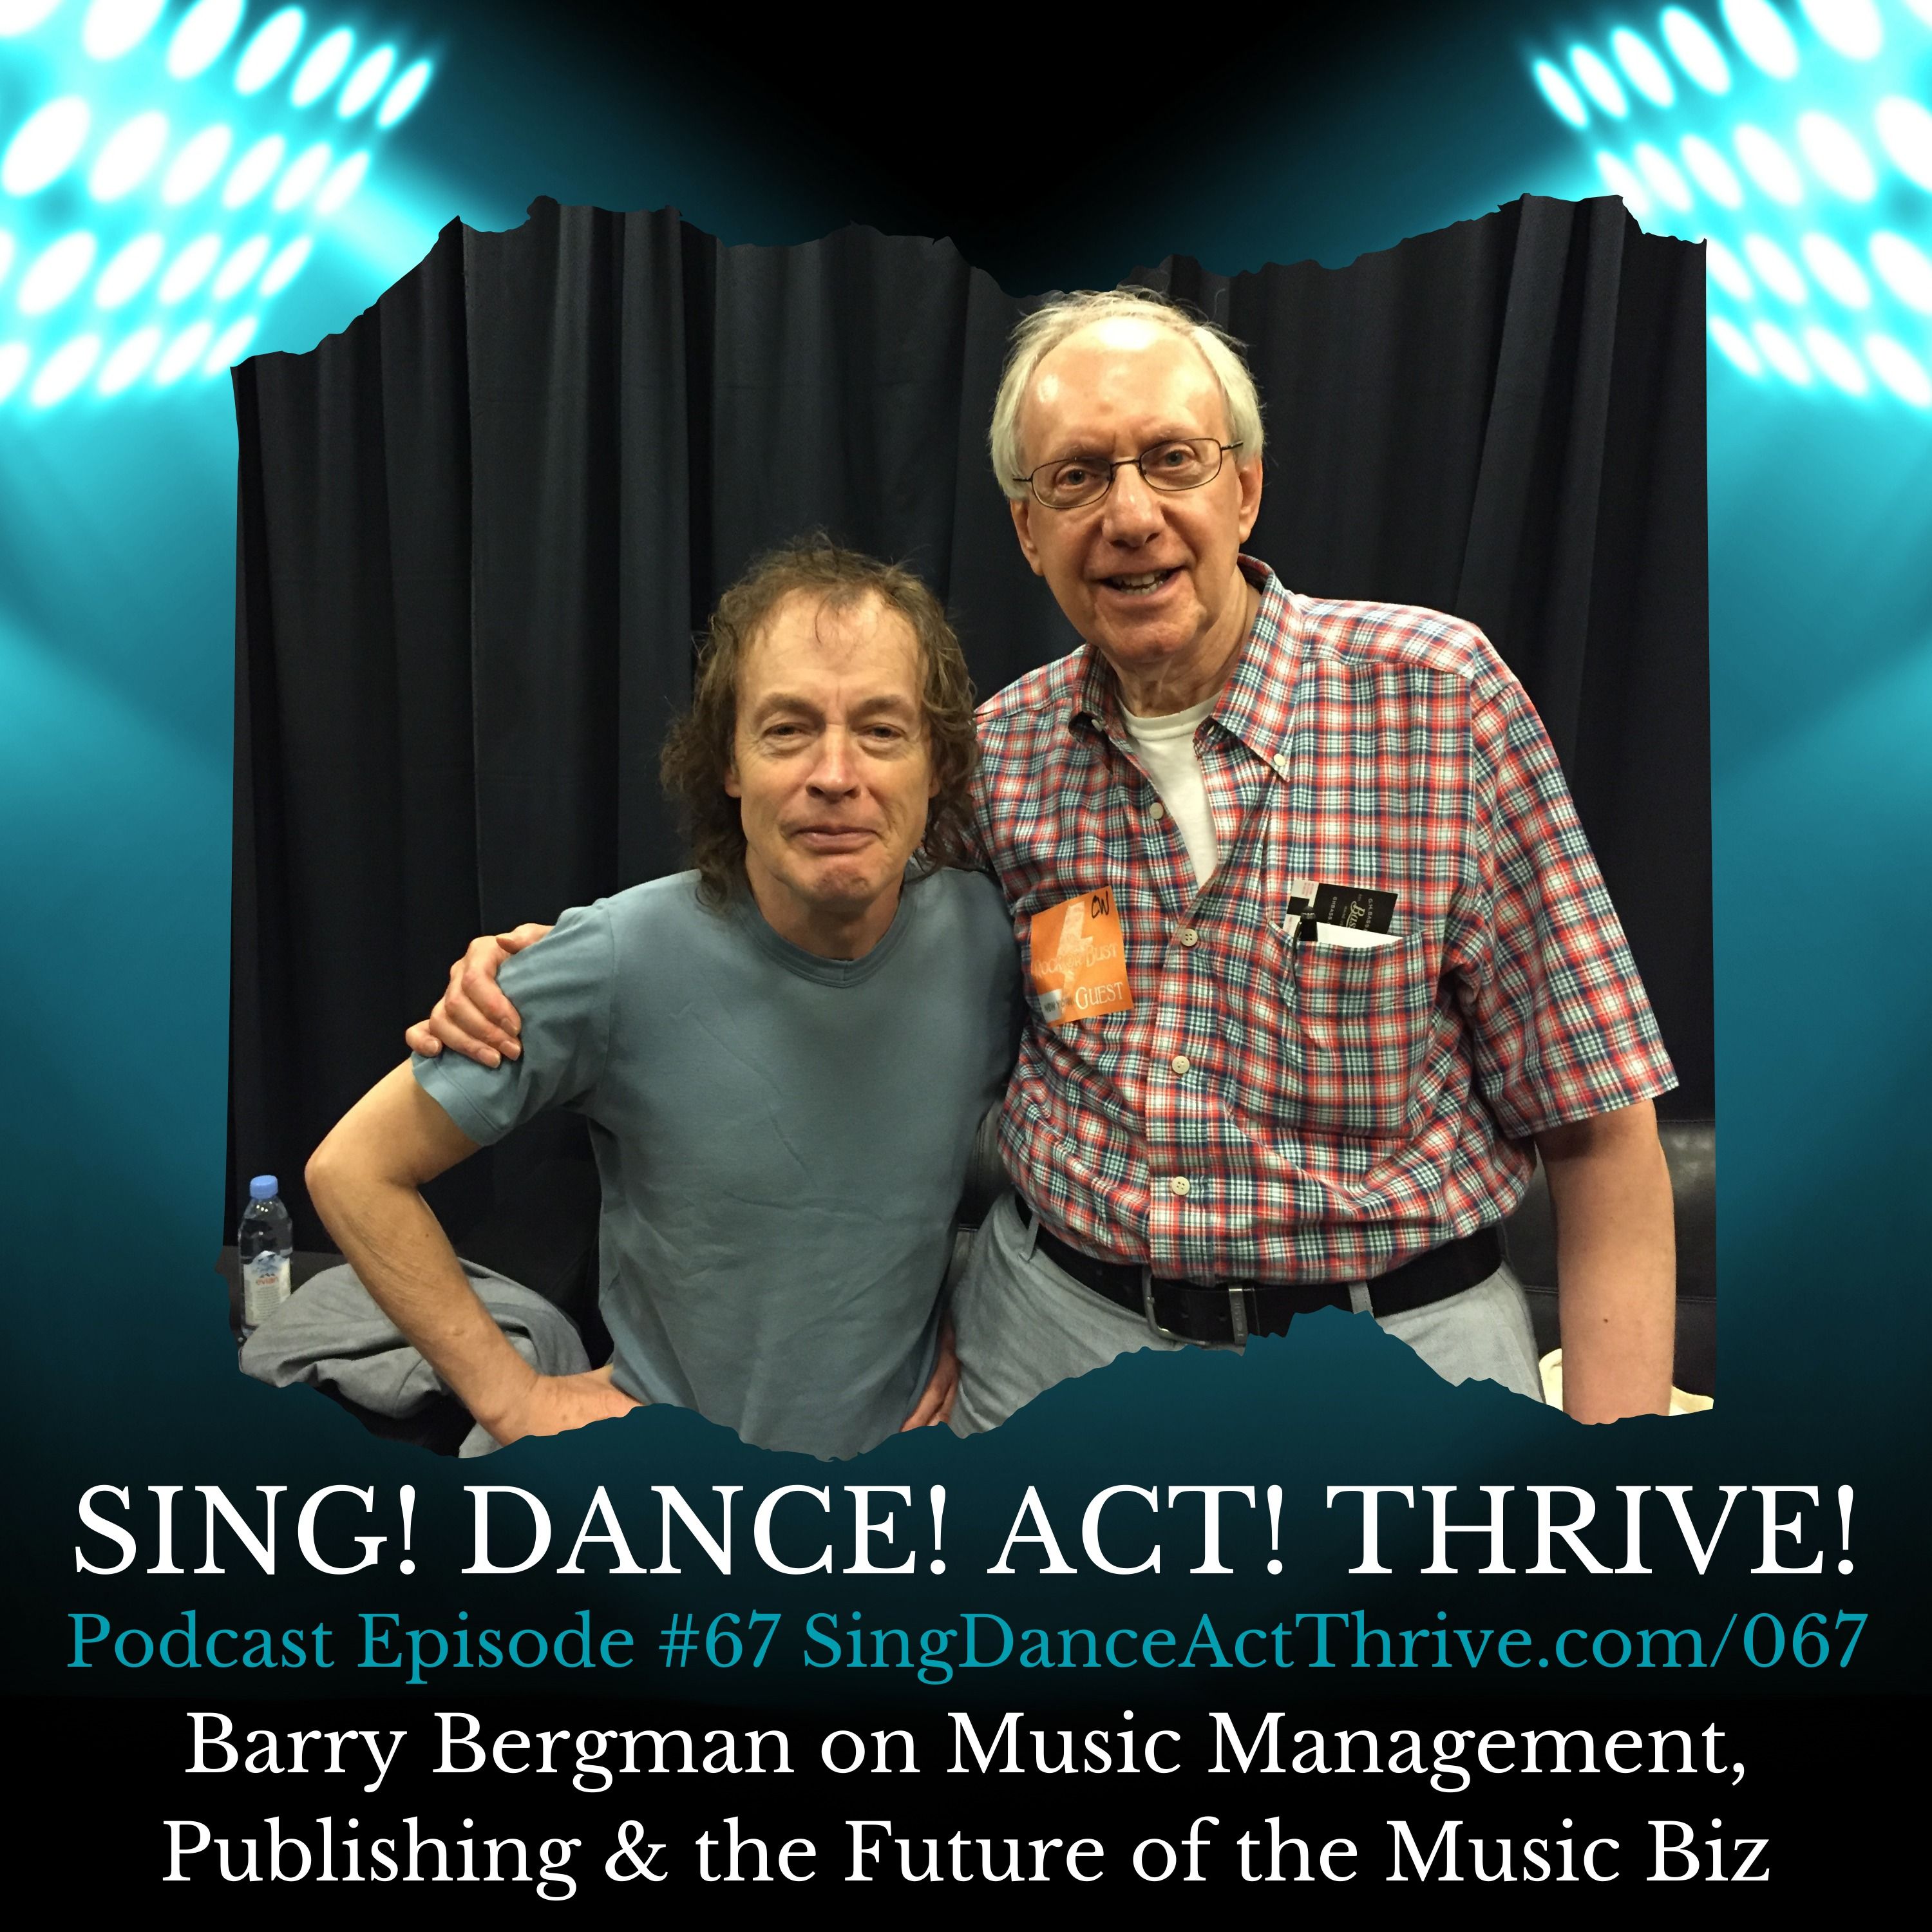 Barry Bergman on Music Management, Publishing & the Future of the Music Industry hero artwork